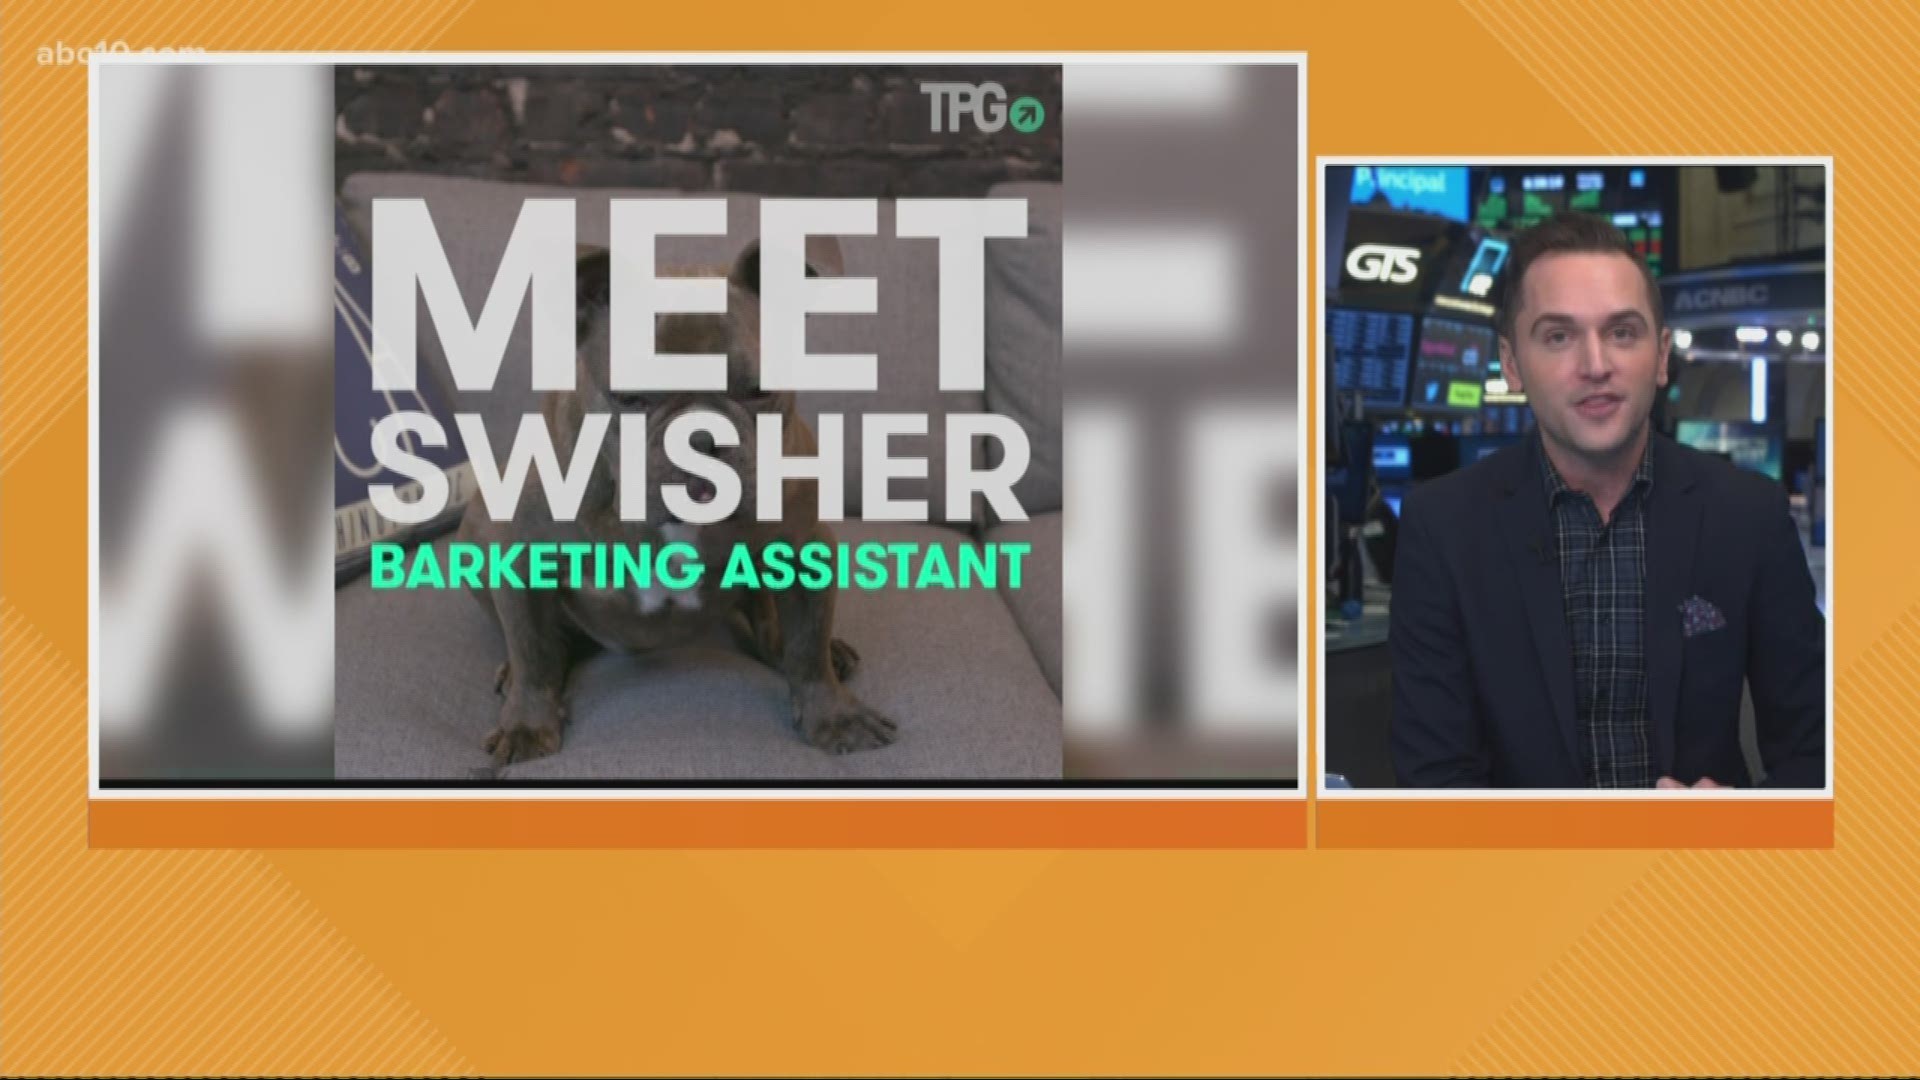 Cheddar TV's Baker Machado joins us from the New York Stock Exchange with today's business headlines.